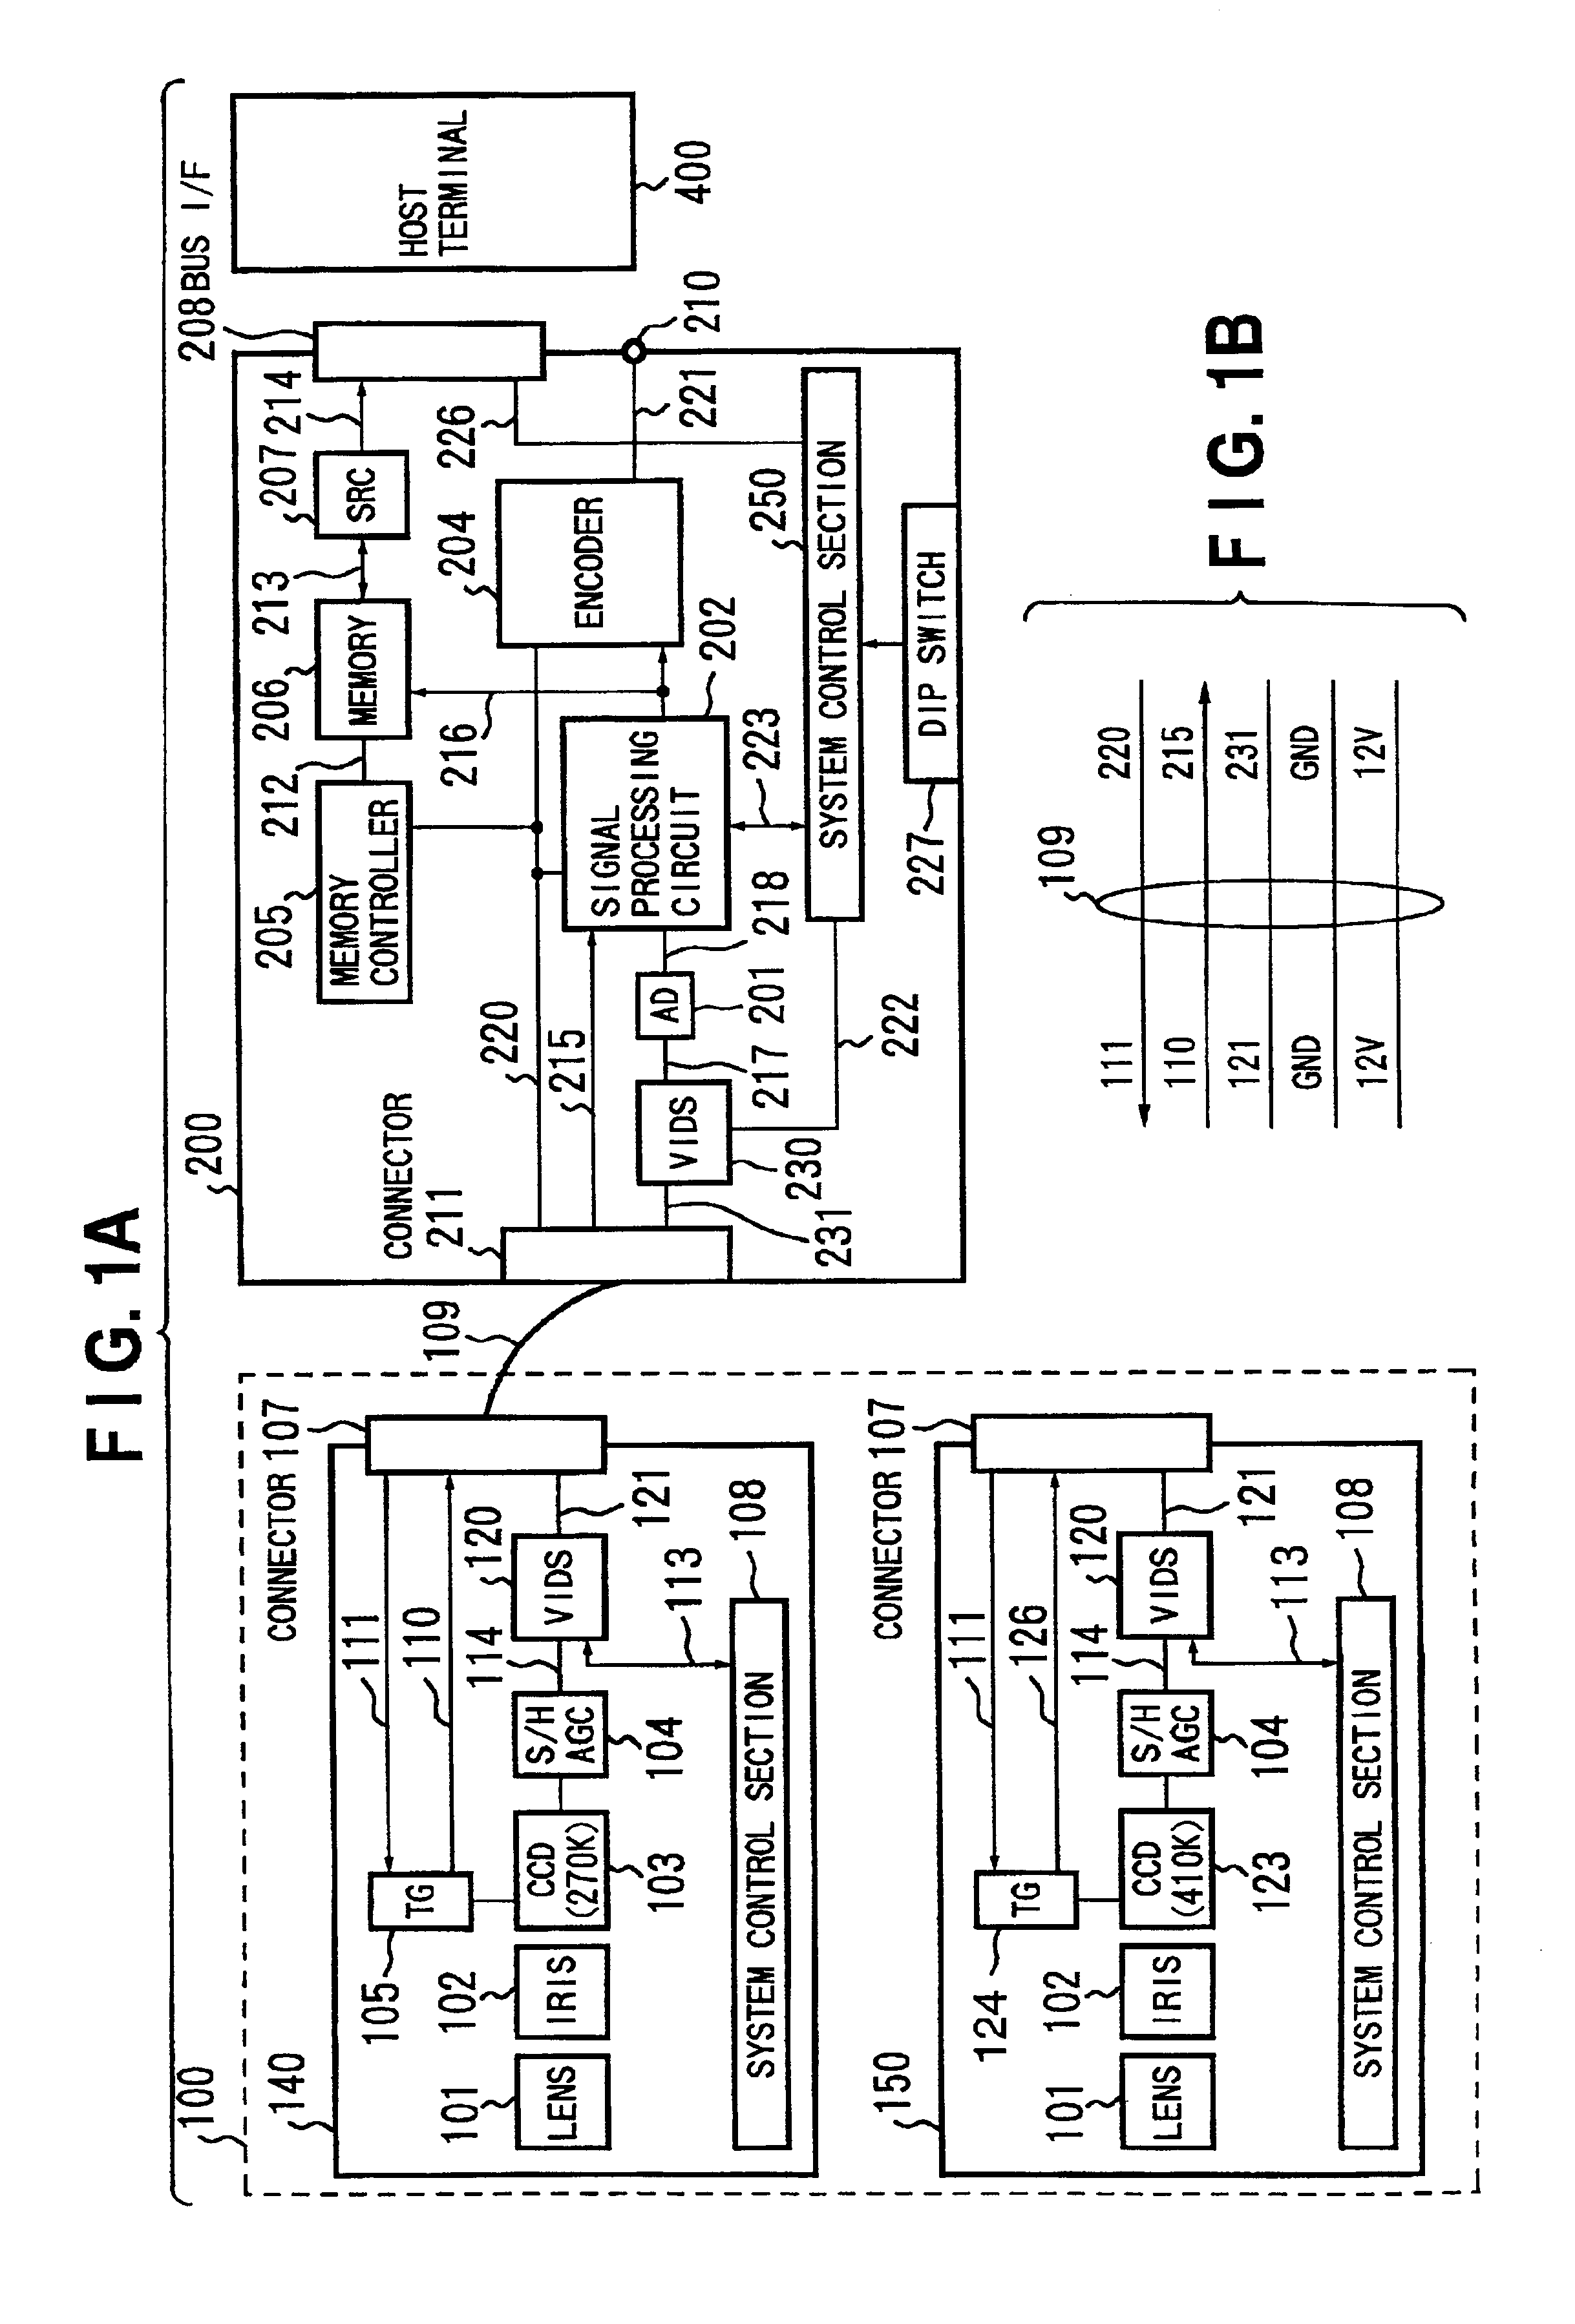 Video input apparatus and image pickup system including the apparatus